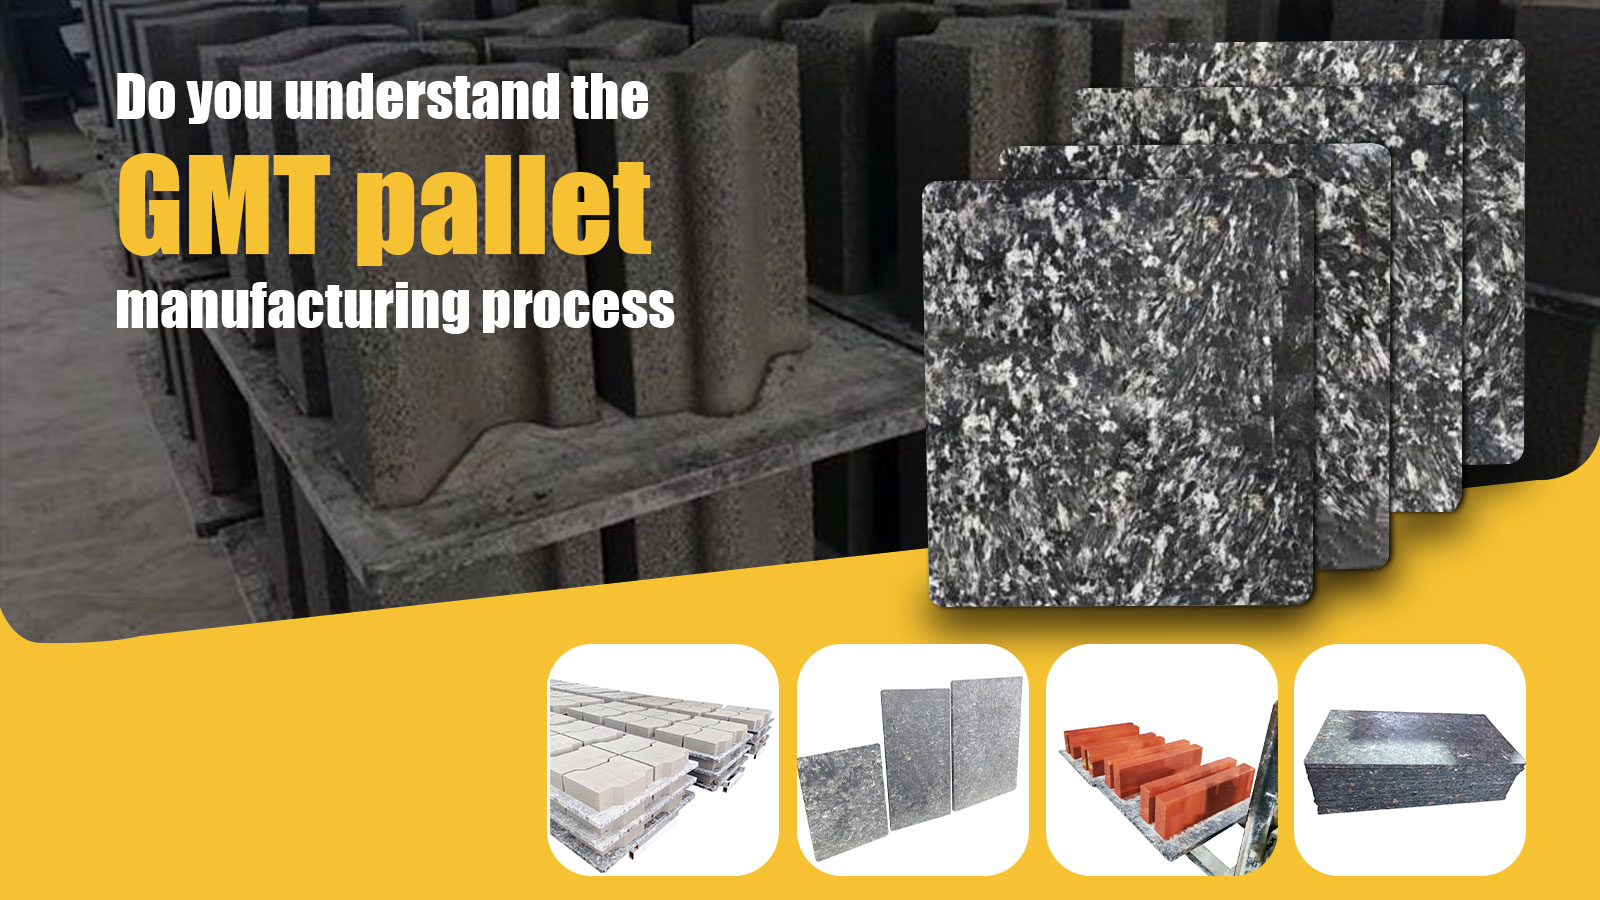 Do you understand the GMT pallet manufacturing process?